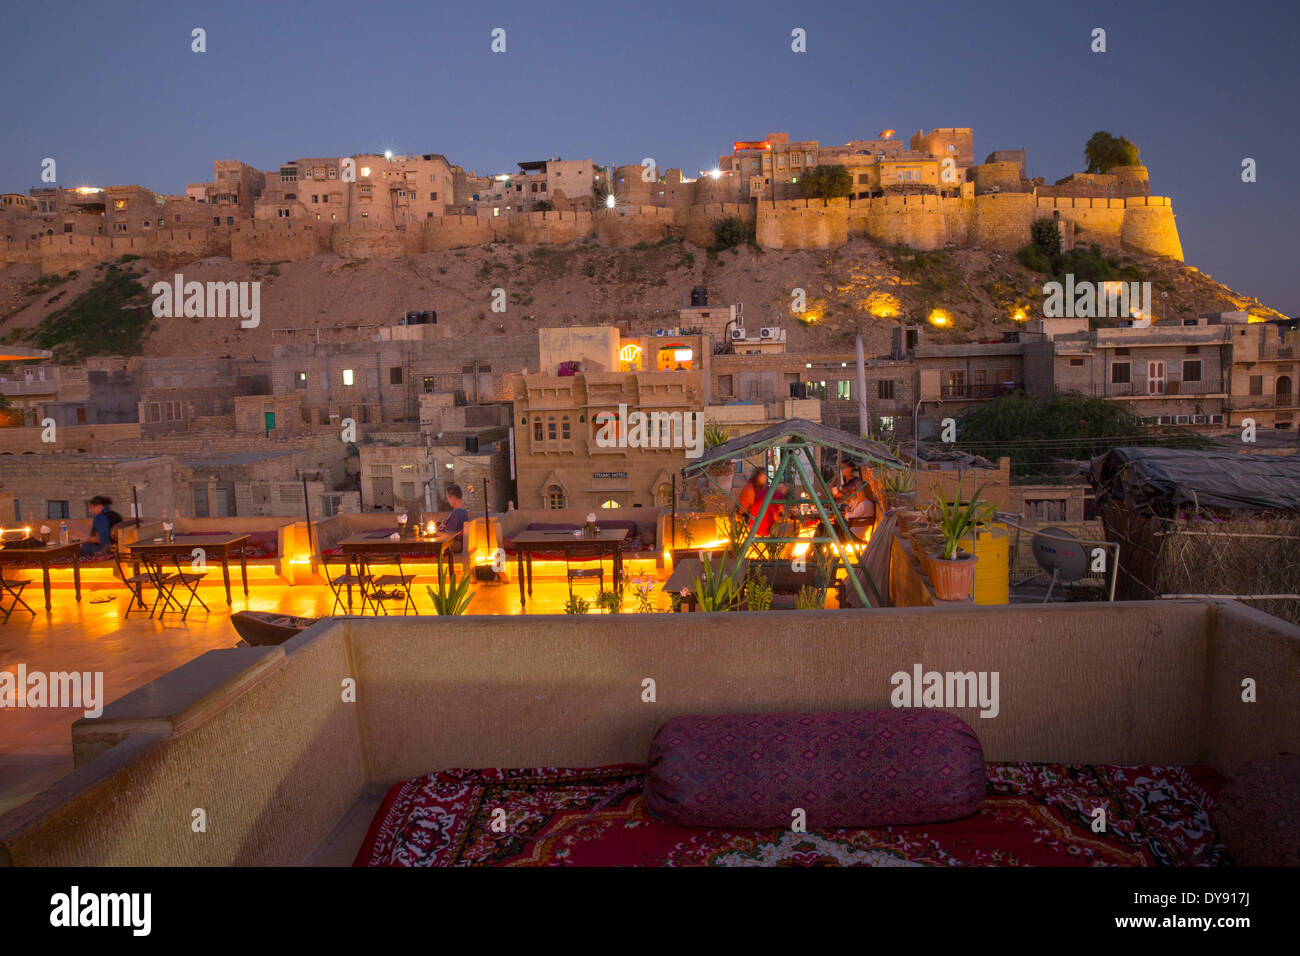 Fort, Jaisalmer, Rajasthan, military wall, bastions, Asia, India, town, city, night, Stock Photo